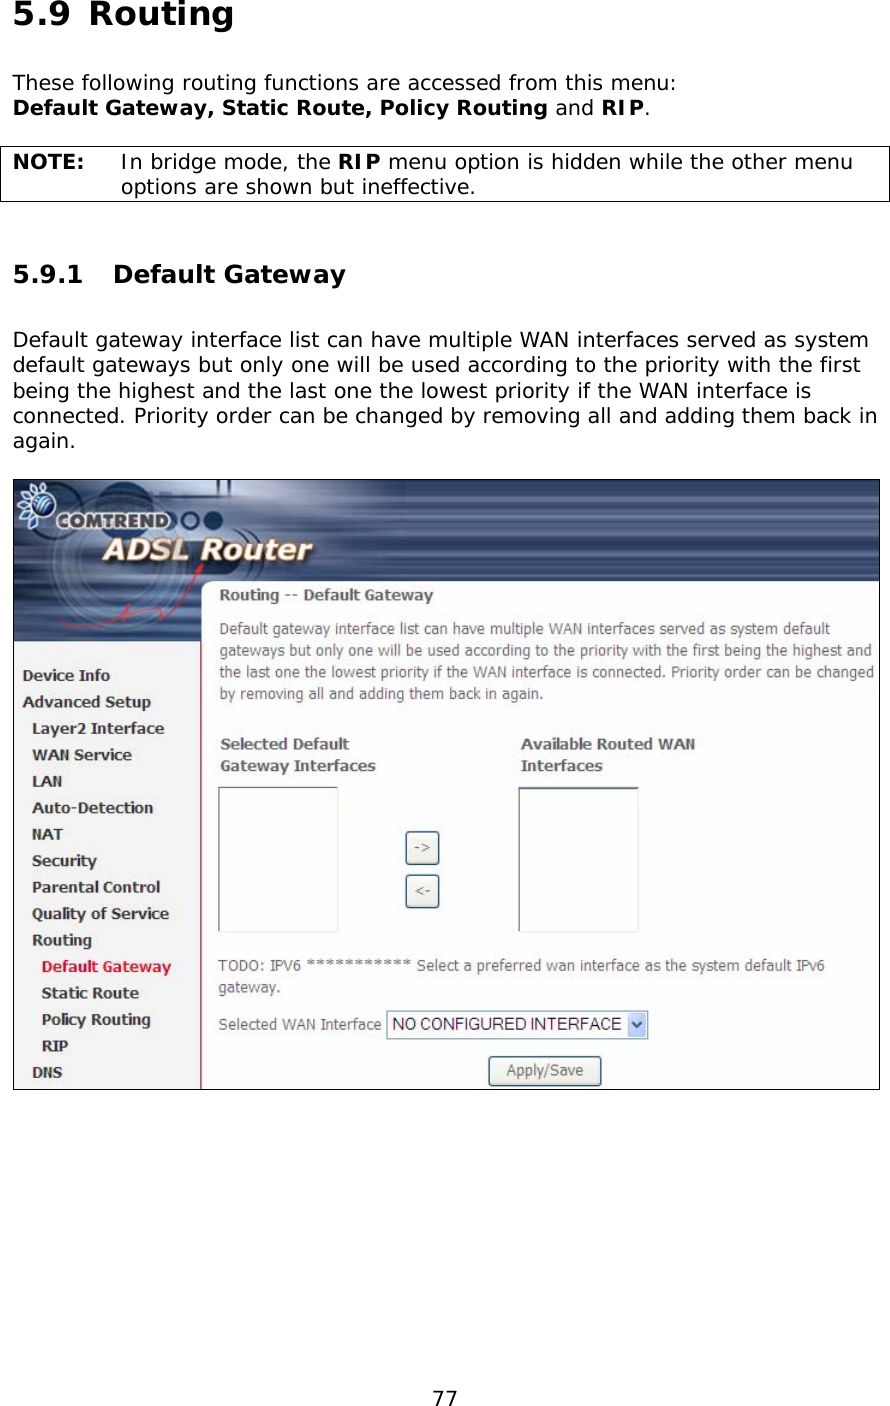  77  5.9 Routing    These following routing functions are accessed from this menu: Default Gateway, Static Route, Policy Routing and RIP.  NOTE:   In bridge mode, the RIP menu option is hidden while the other menu options are shown but ineffective. 5.9.1 Default Gateway Default gateway interface list can have multiple WAN interfaces served as system default gateways but only one will be used according to the priority with the first being the highest and the last one the lowest priority if the WAN interface is connected. Priority order can be changed by removing all and adding them back in again.     